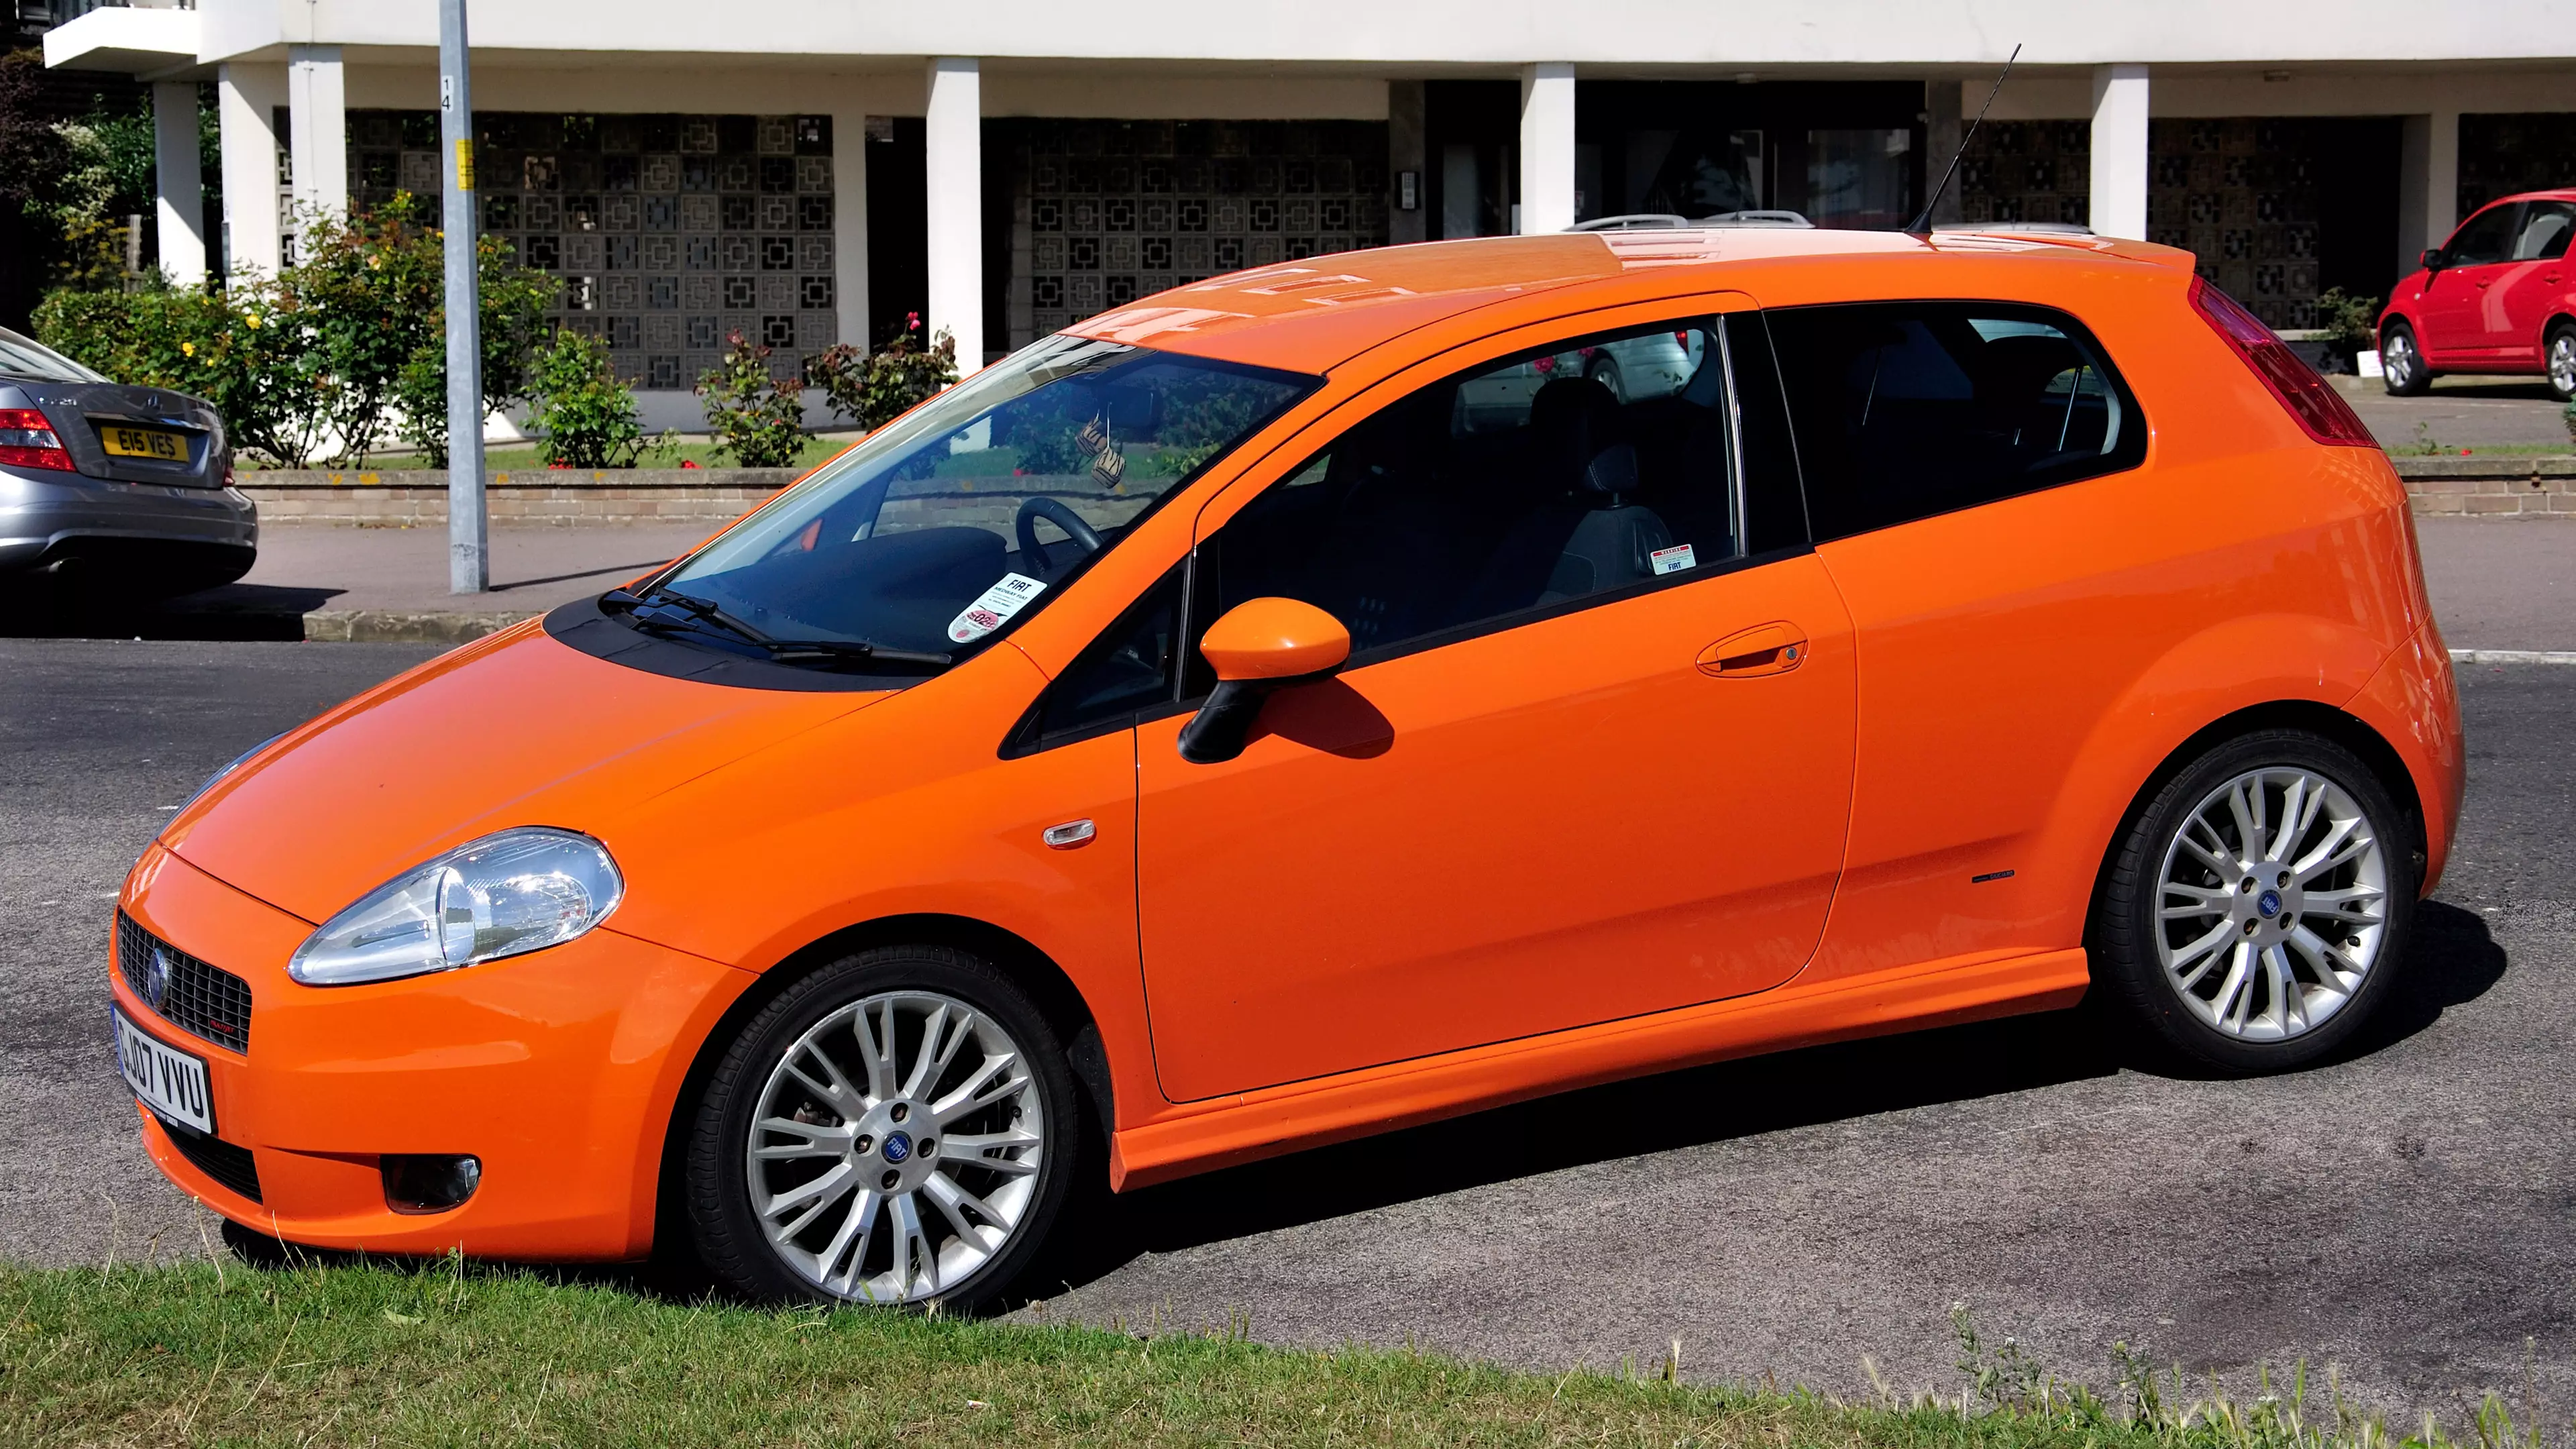 Man Rammed Audi Driver Off Road For 'Disrespecting' His Orange Punto